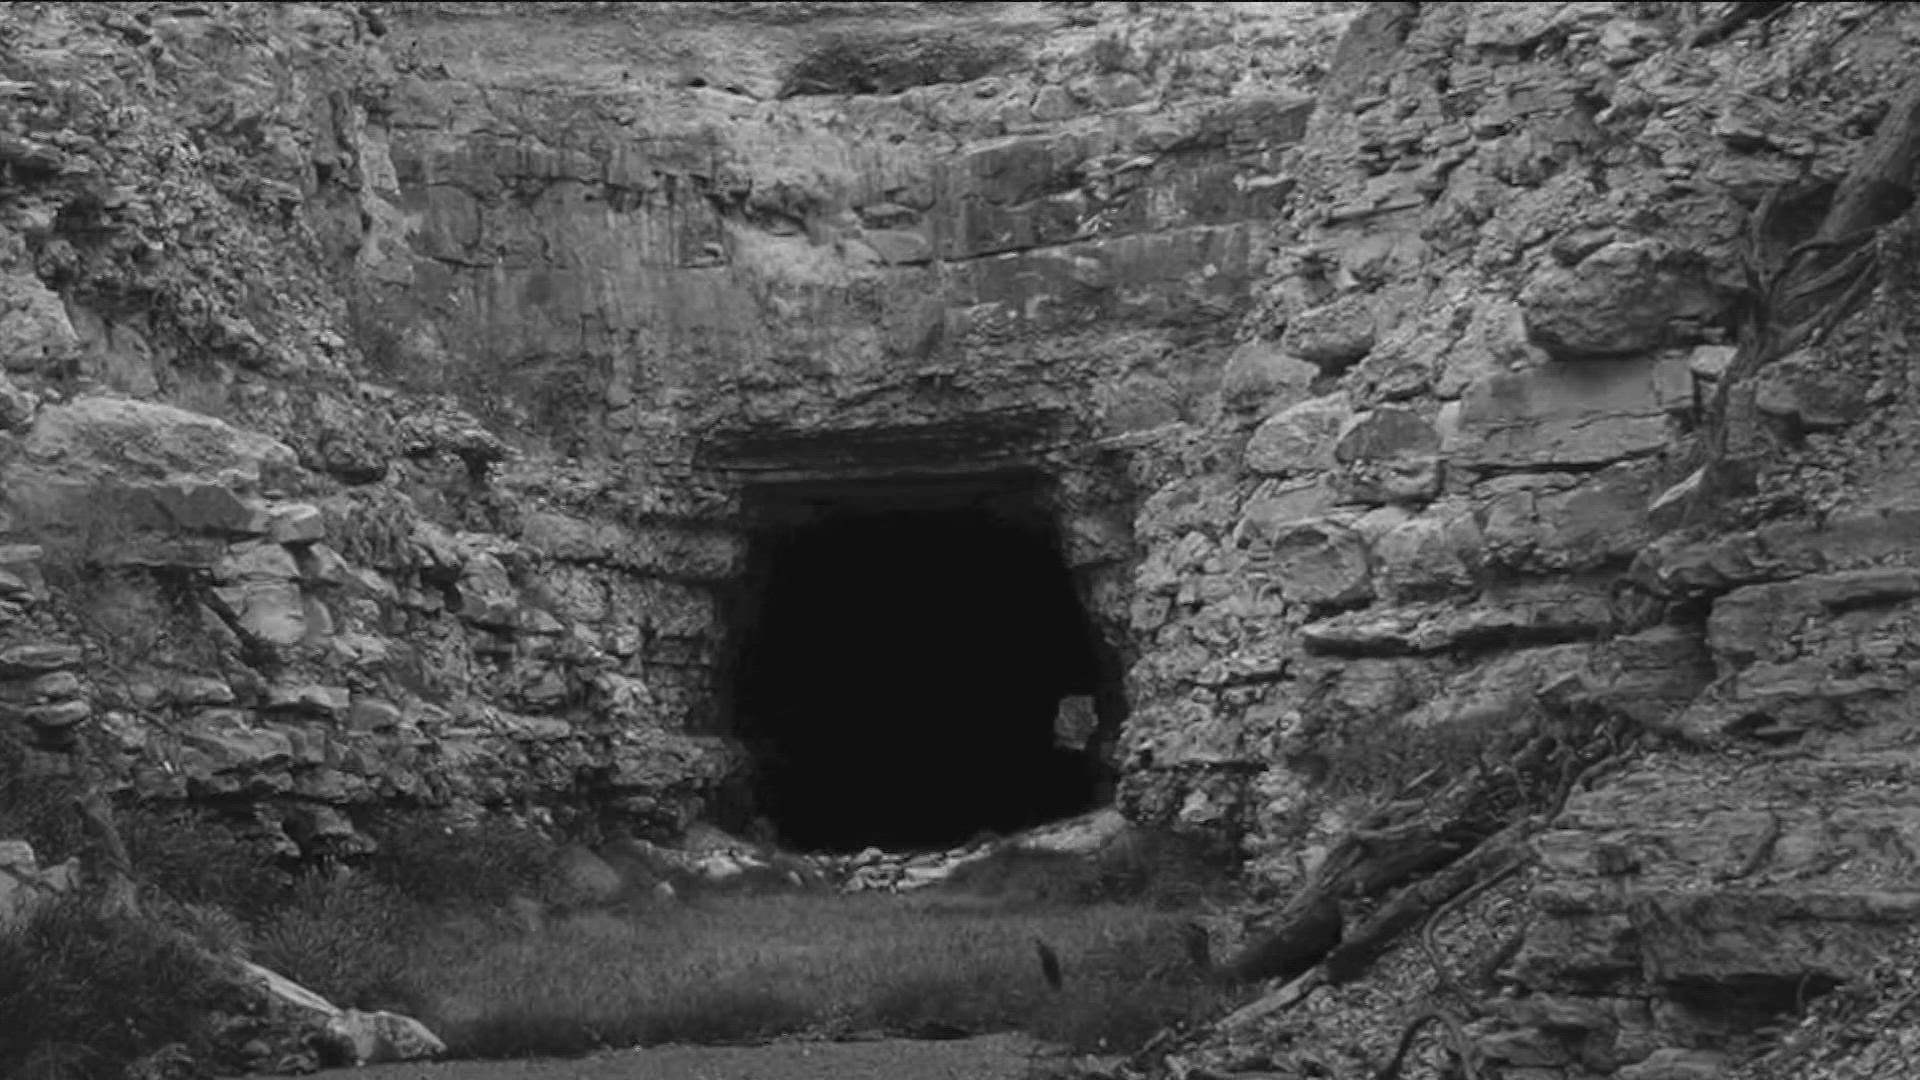 We take you inside Old Tunnel State Park in the Texas Hill Country. The park is now home to a colony of bats.